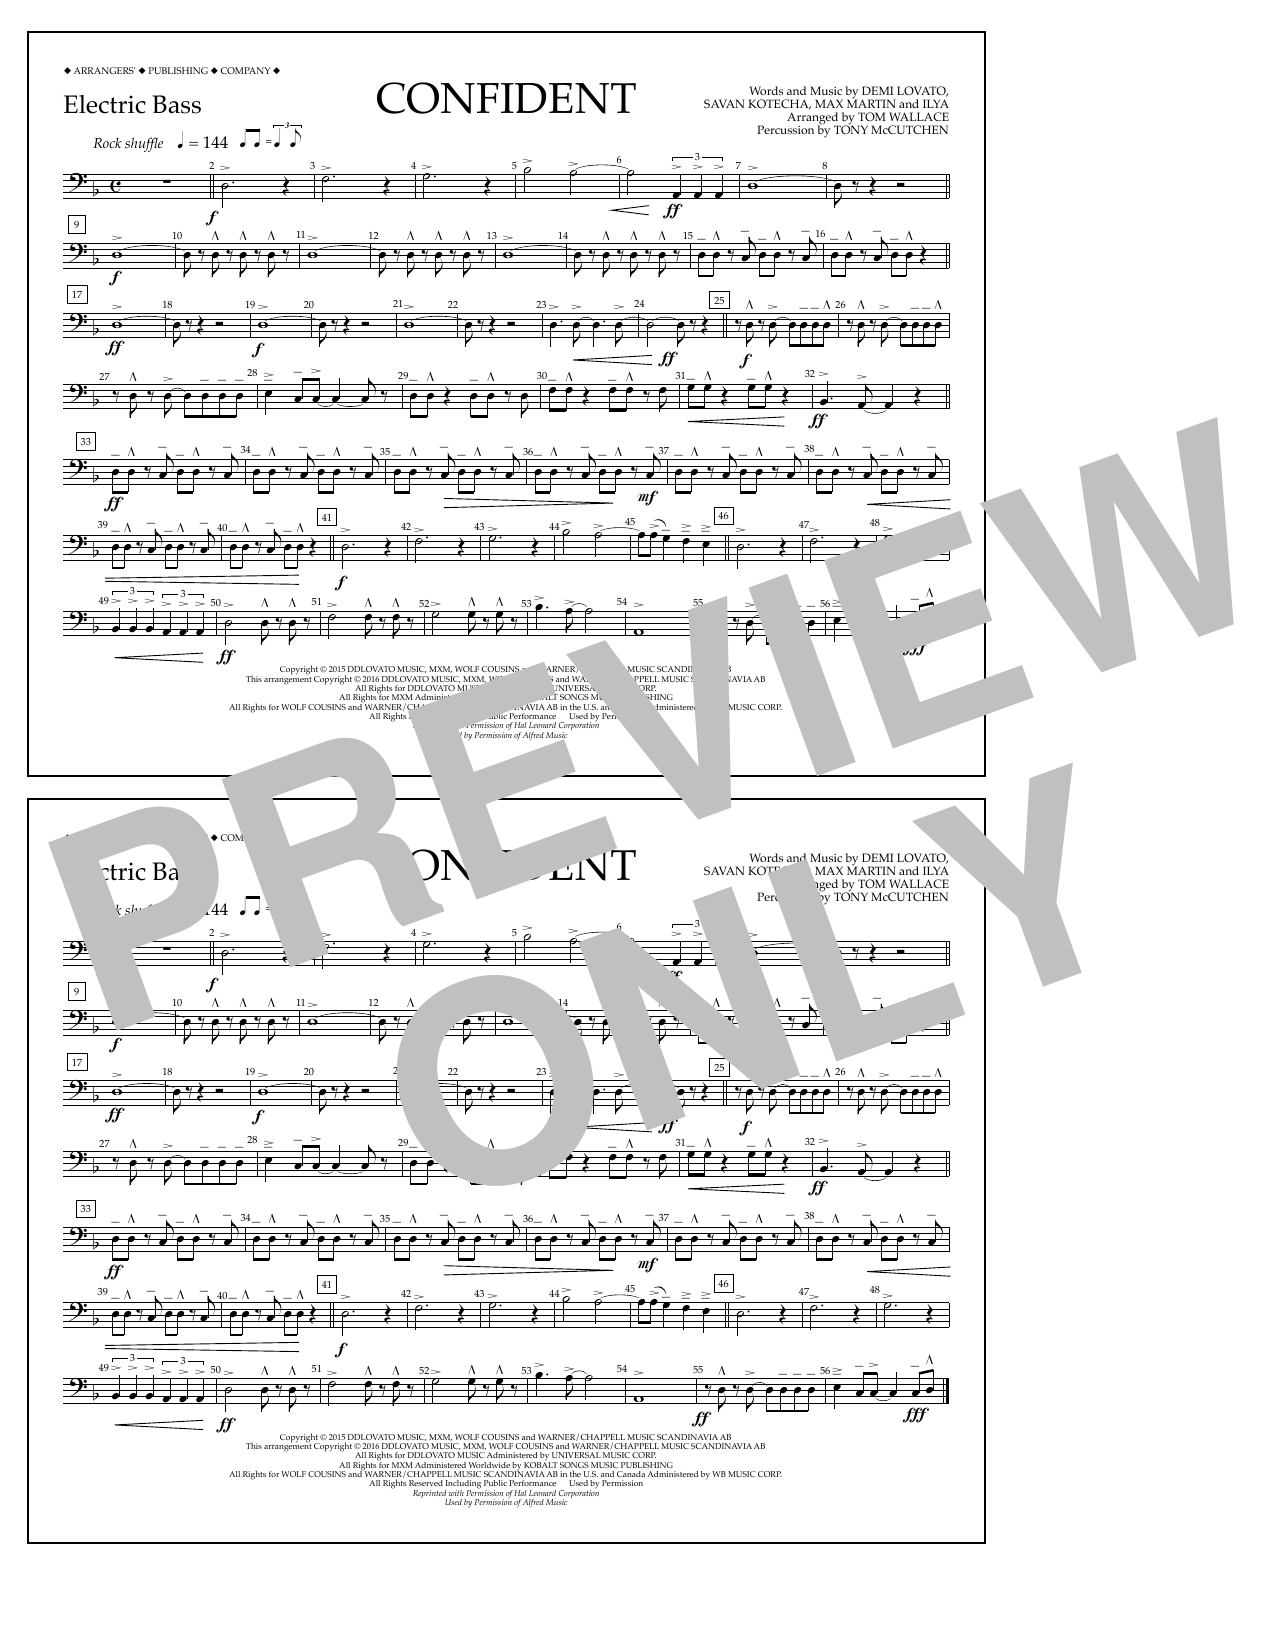 Download Tom Wallace Confident - Electric Bass Sheet Music